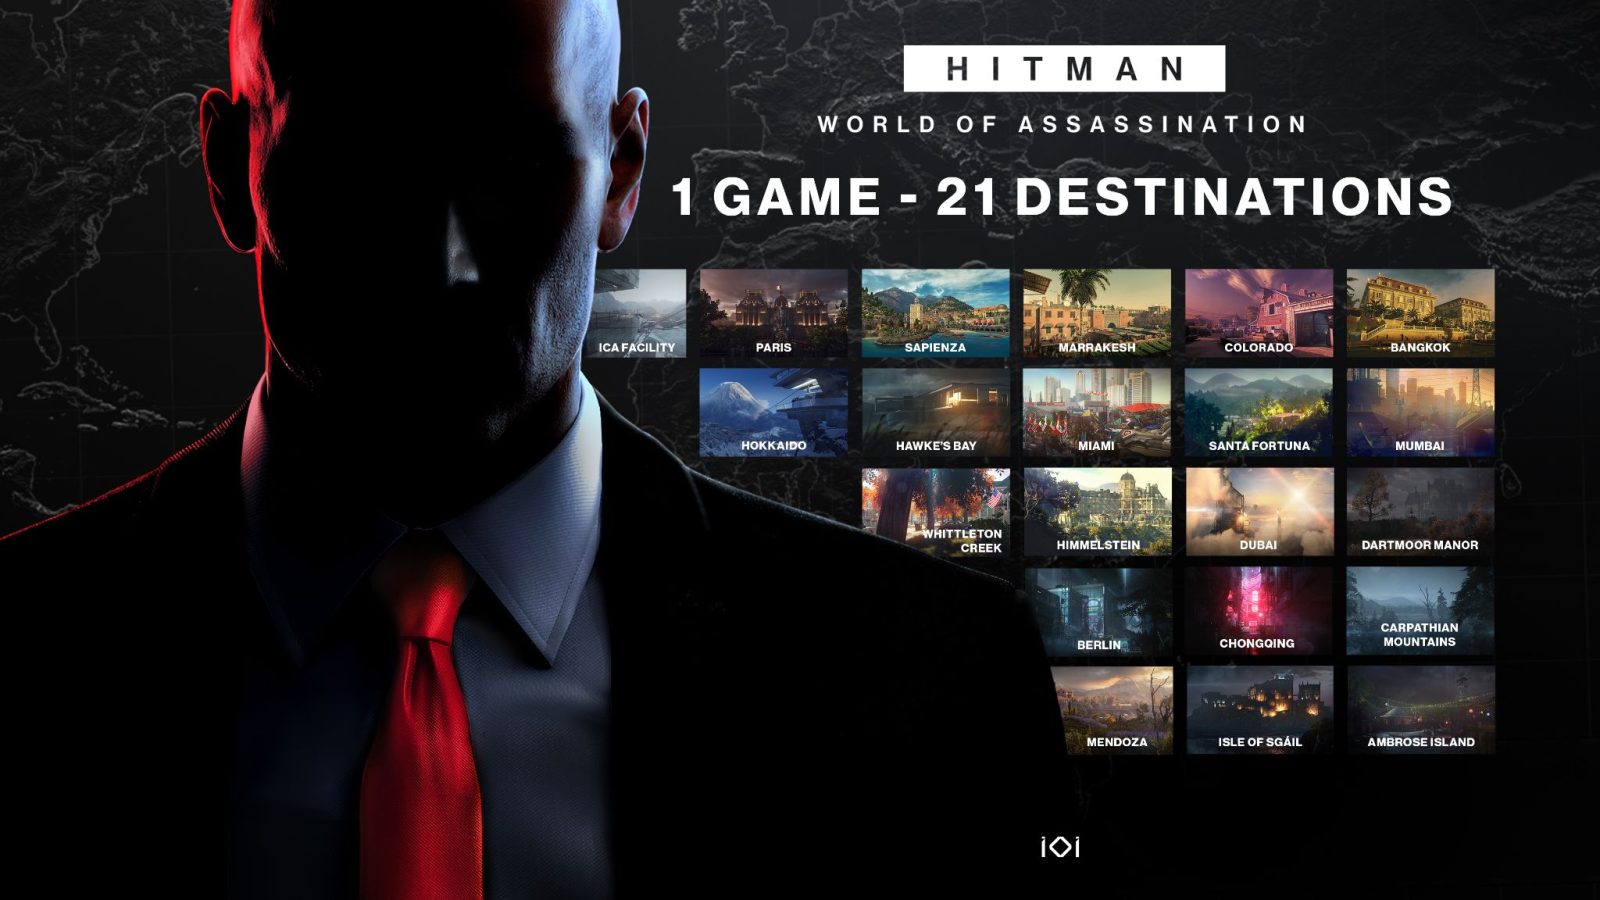 Hitman 3, A Review - Stealth Gaming